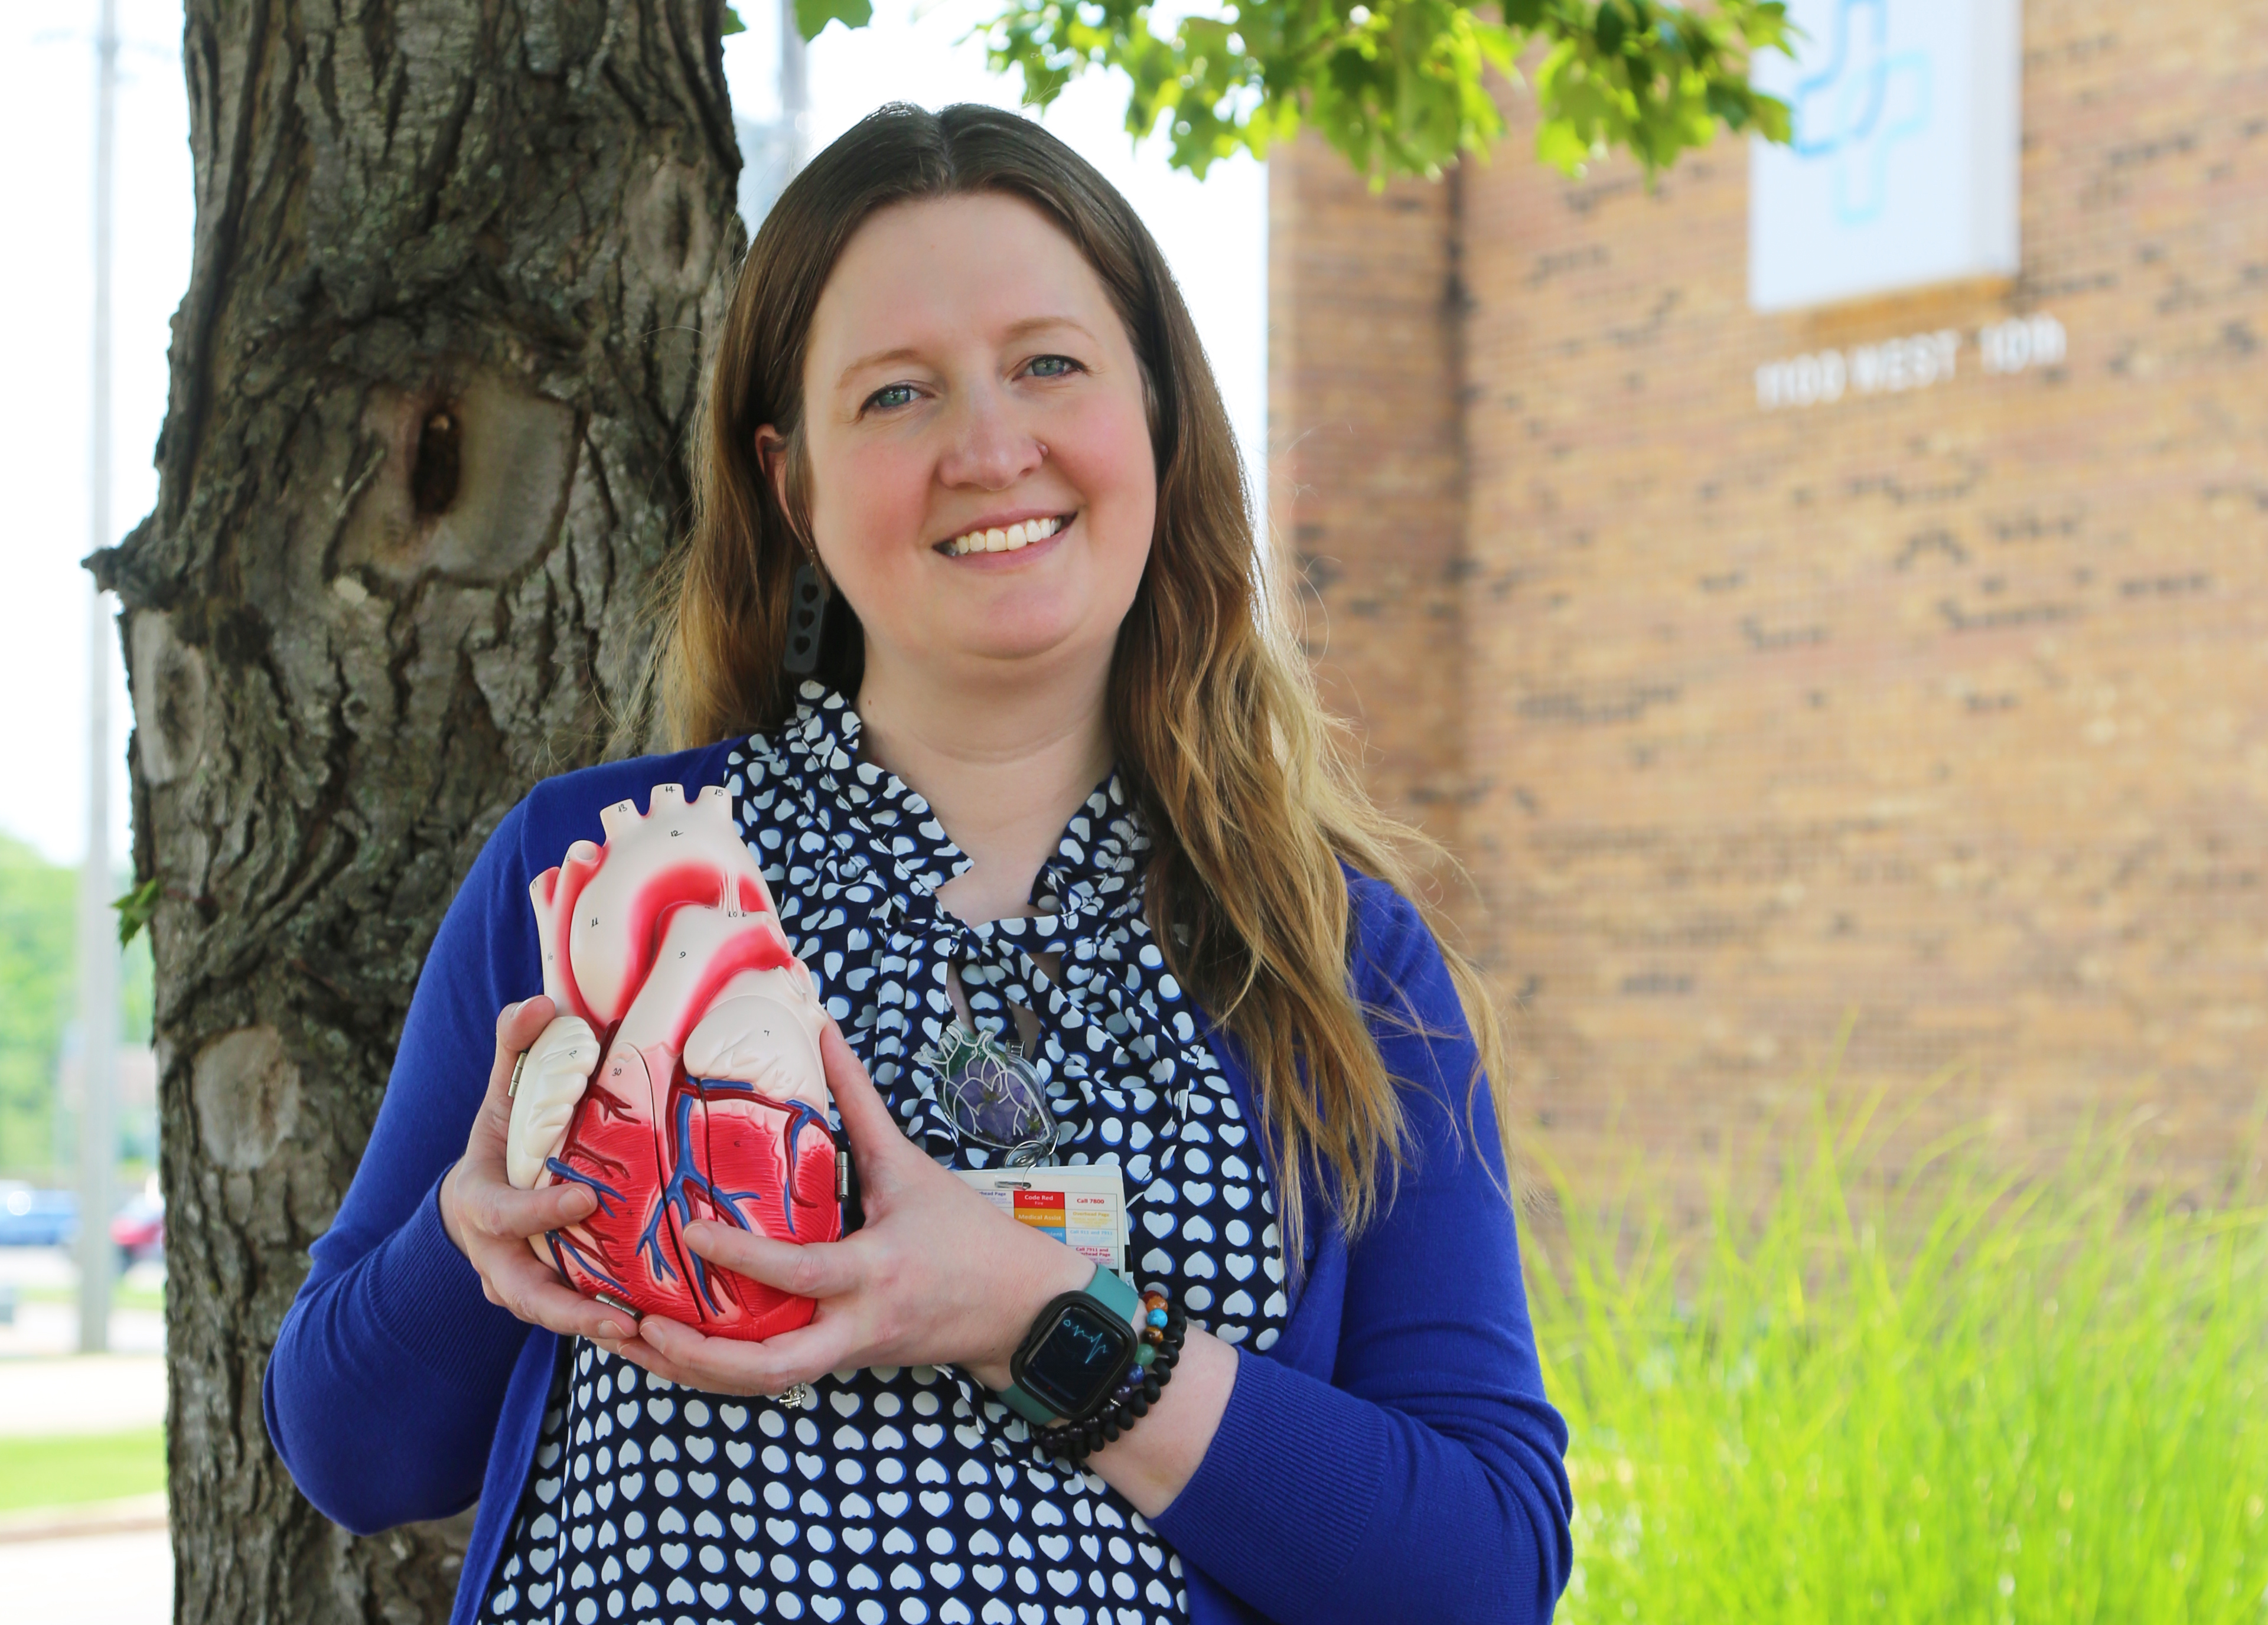 Woman holding a heart model standings outside next to a tree